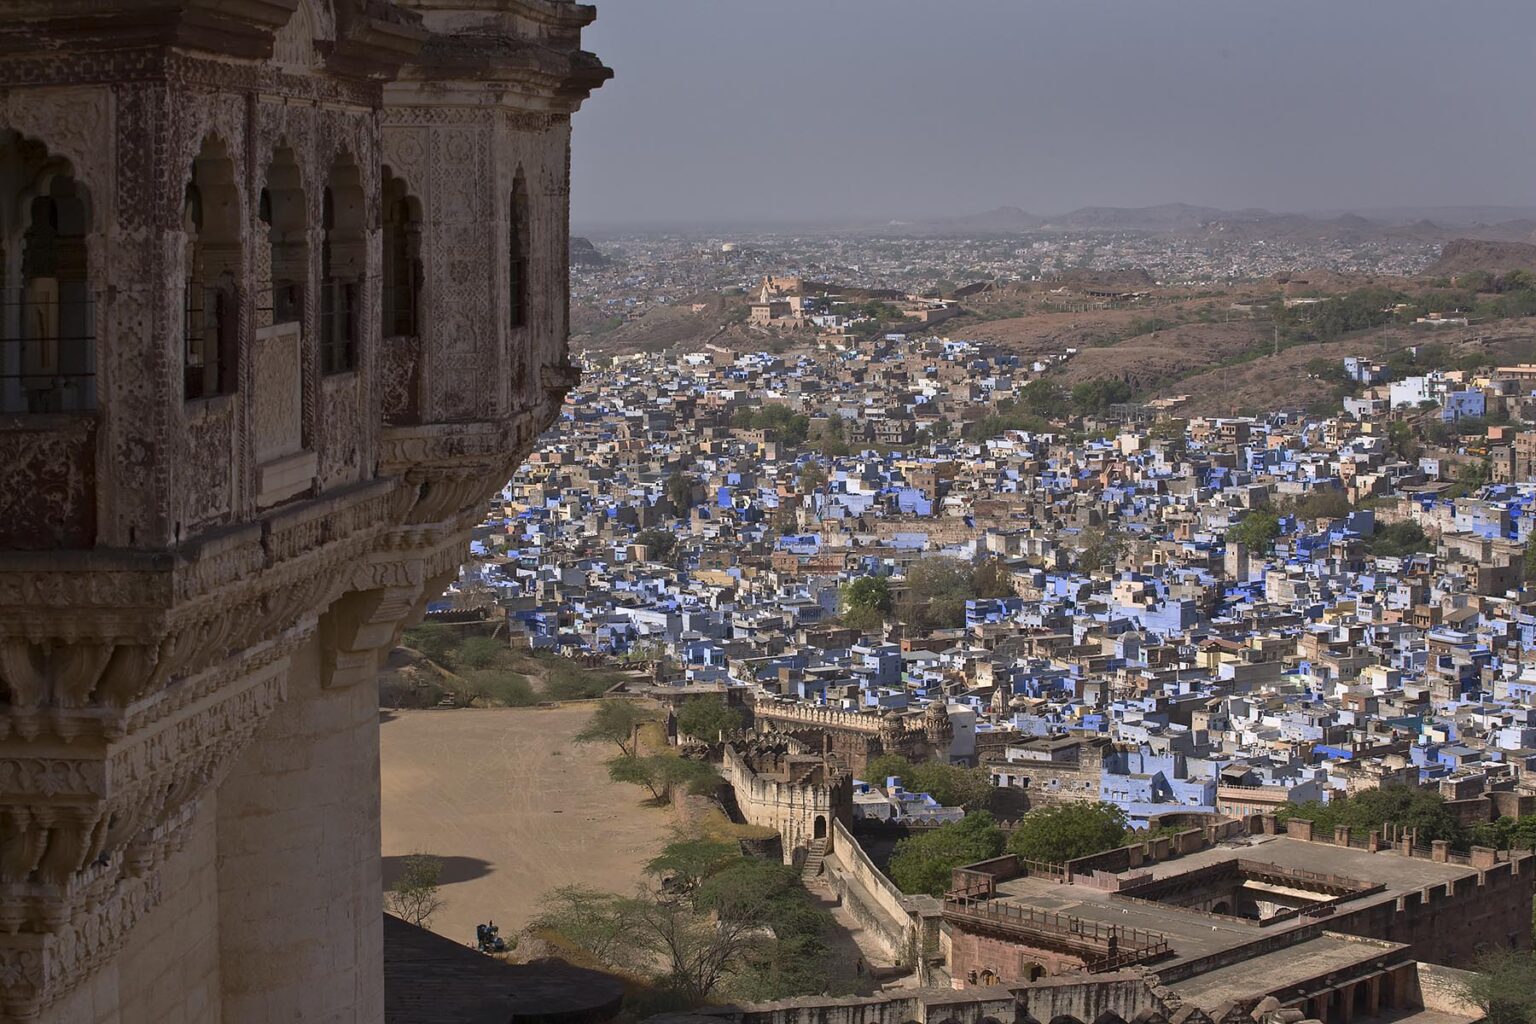 The MEHERANGARH FORT built by Maharaja Man Singh in 1806 with the BLUE CITY of JOHDPUR below - RAJASTHAN, INDIA